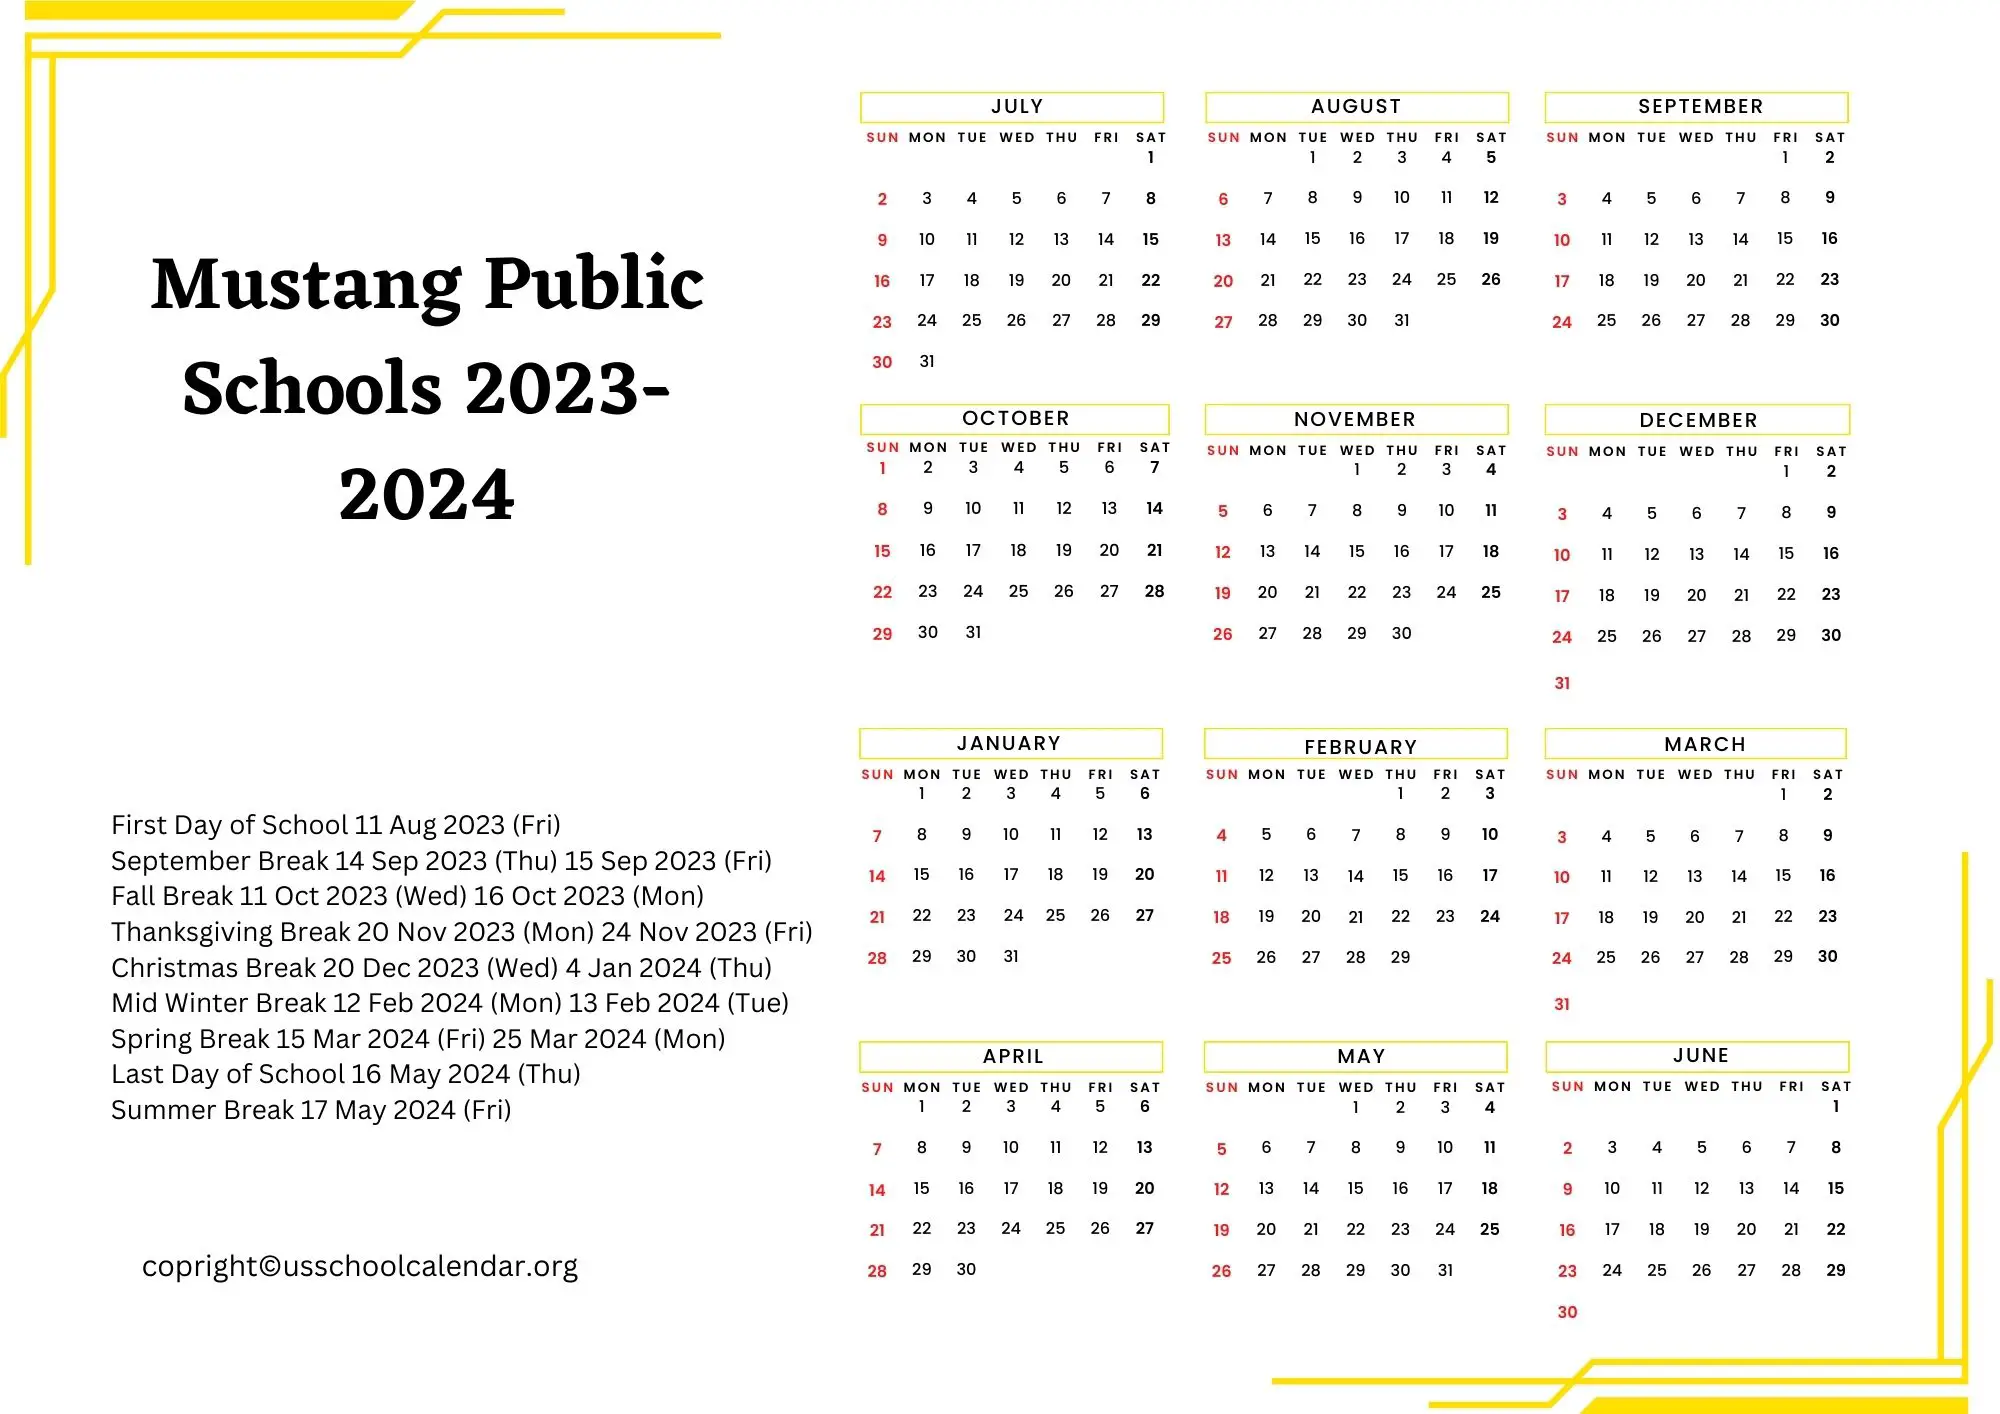 Mustang Public Schools Calendar with Holidays 20232024